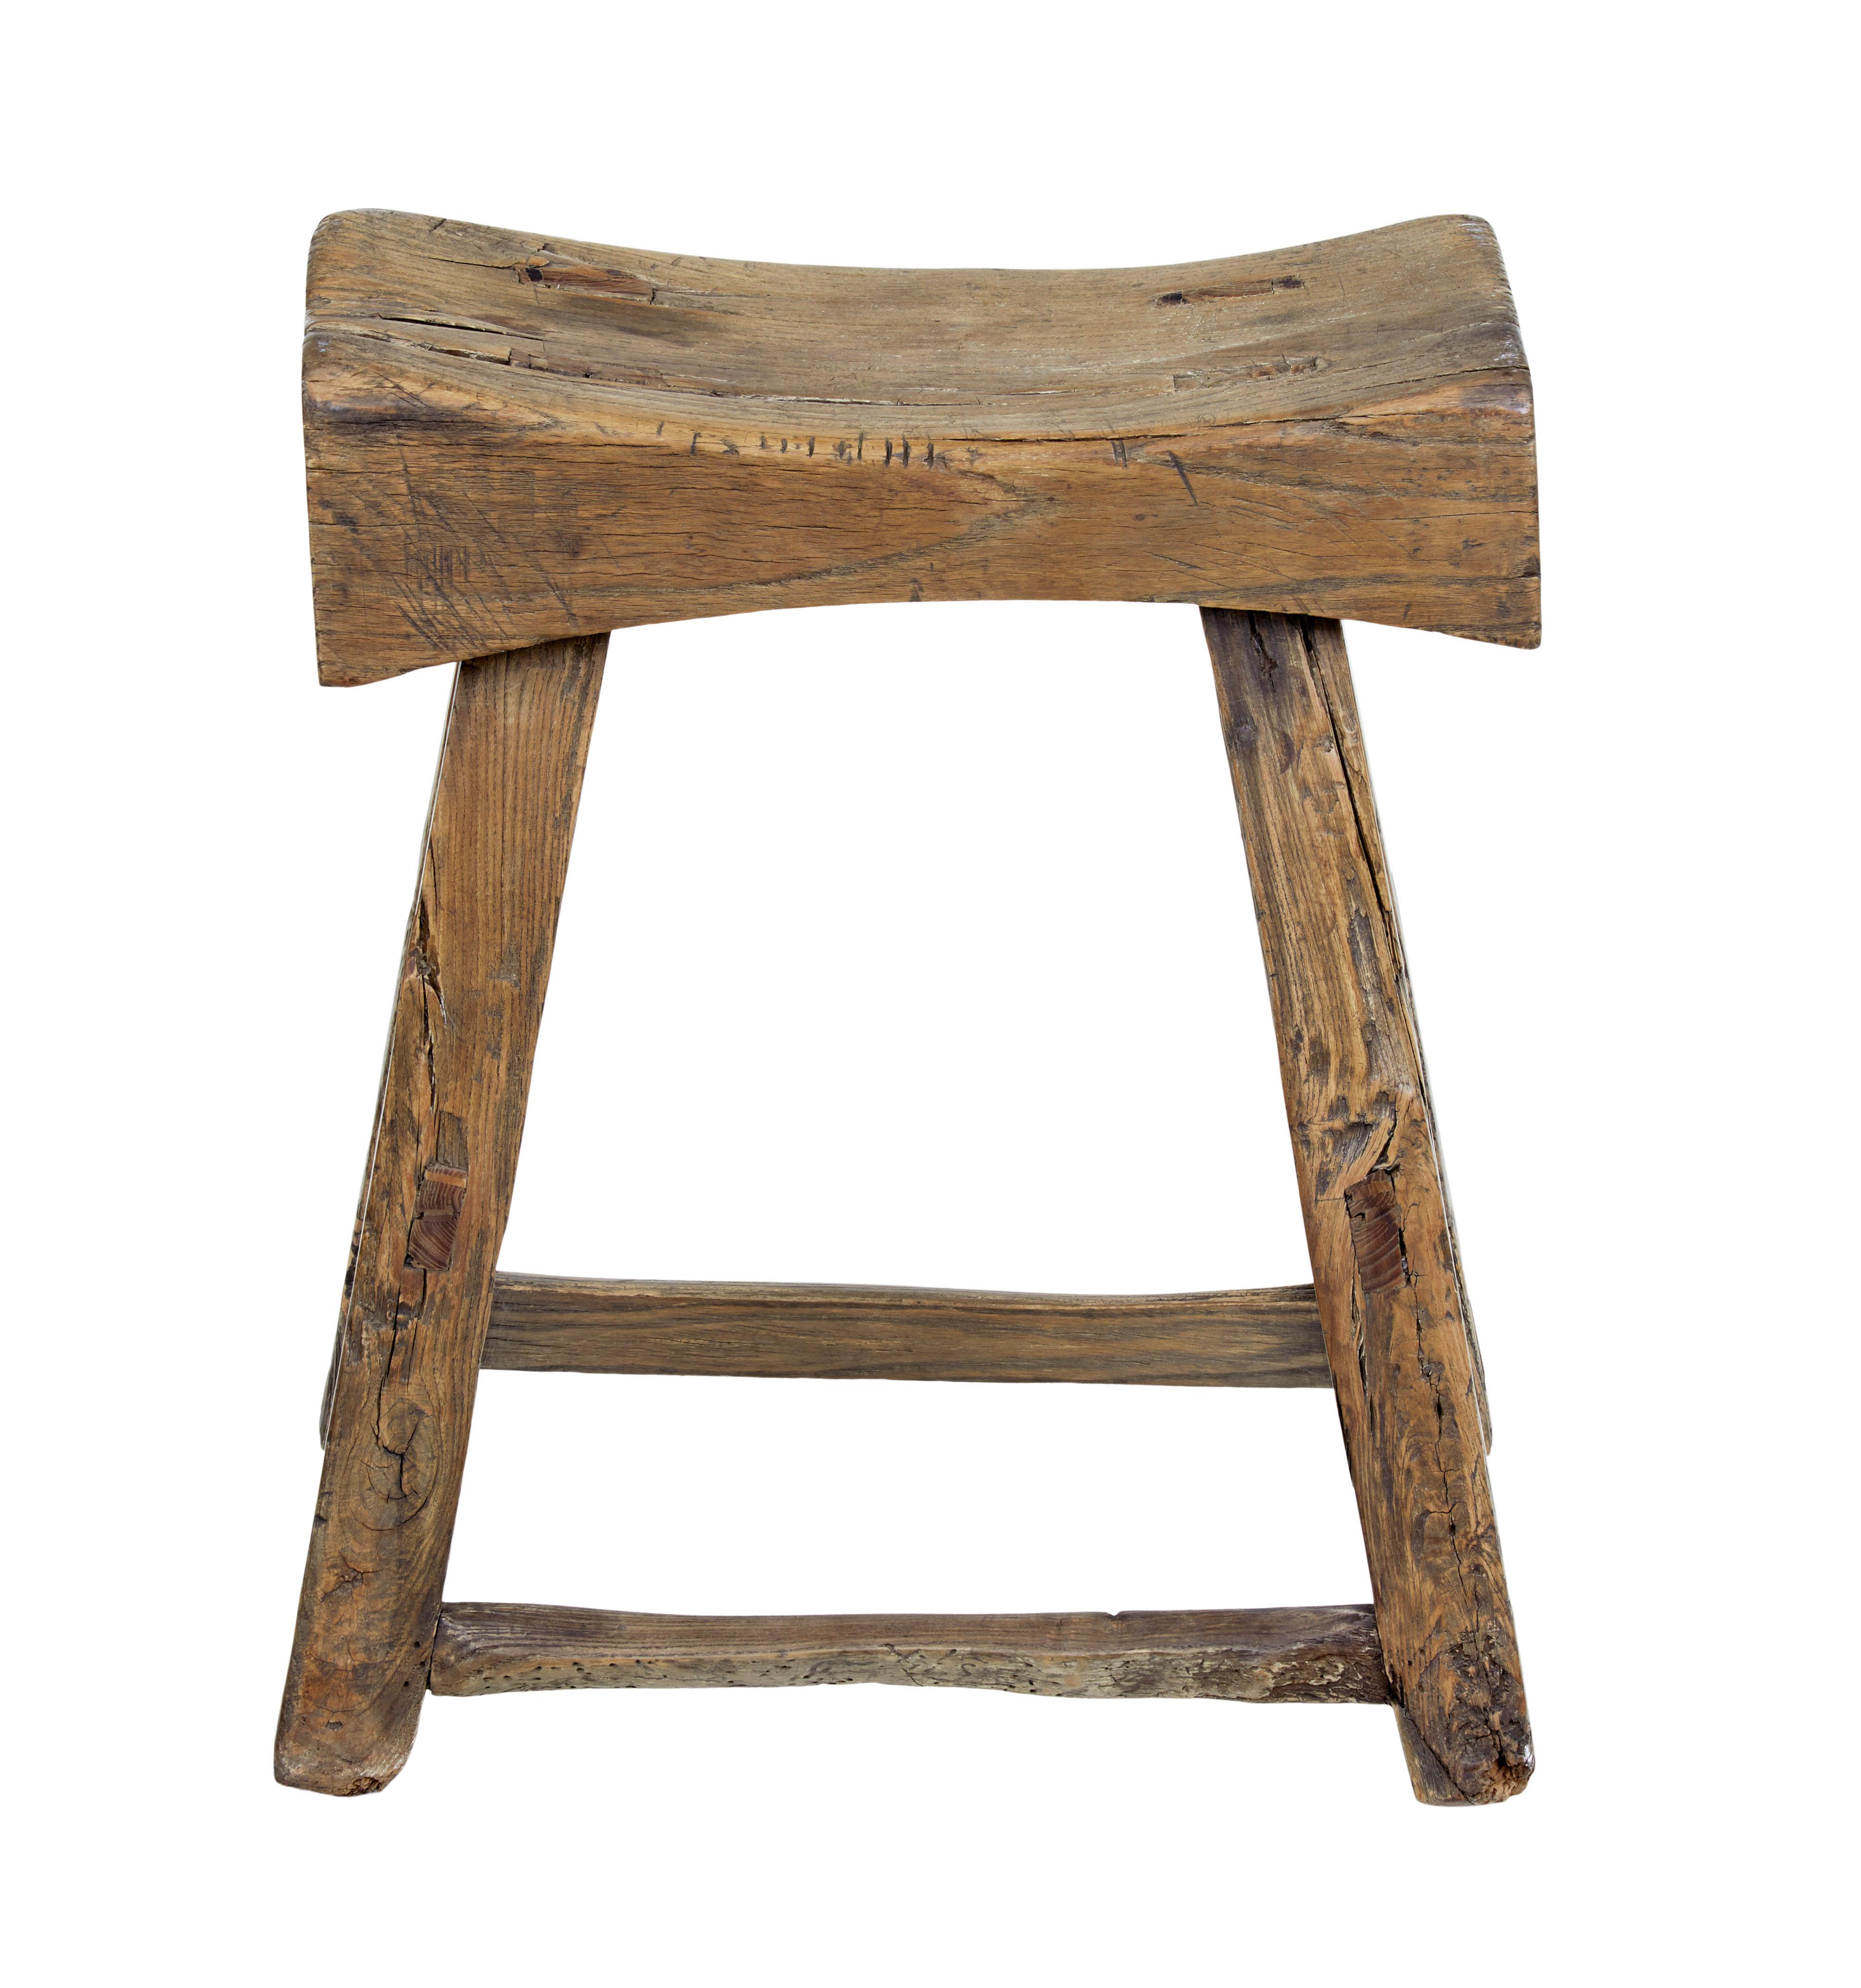 19th century chinese qing hardwood stool circa 1870.

Carved out seat almost like a butchers block. Standing on 4 legs joined by stretchers.

Character pieces of wood with knots and splits and old restorations. Heavy item due to the dense wood